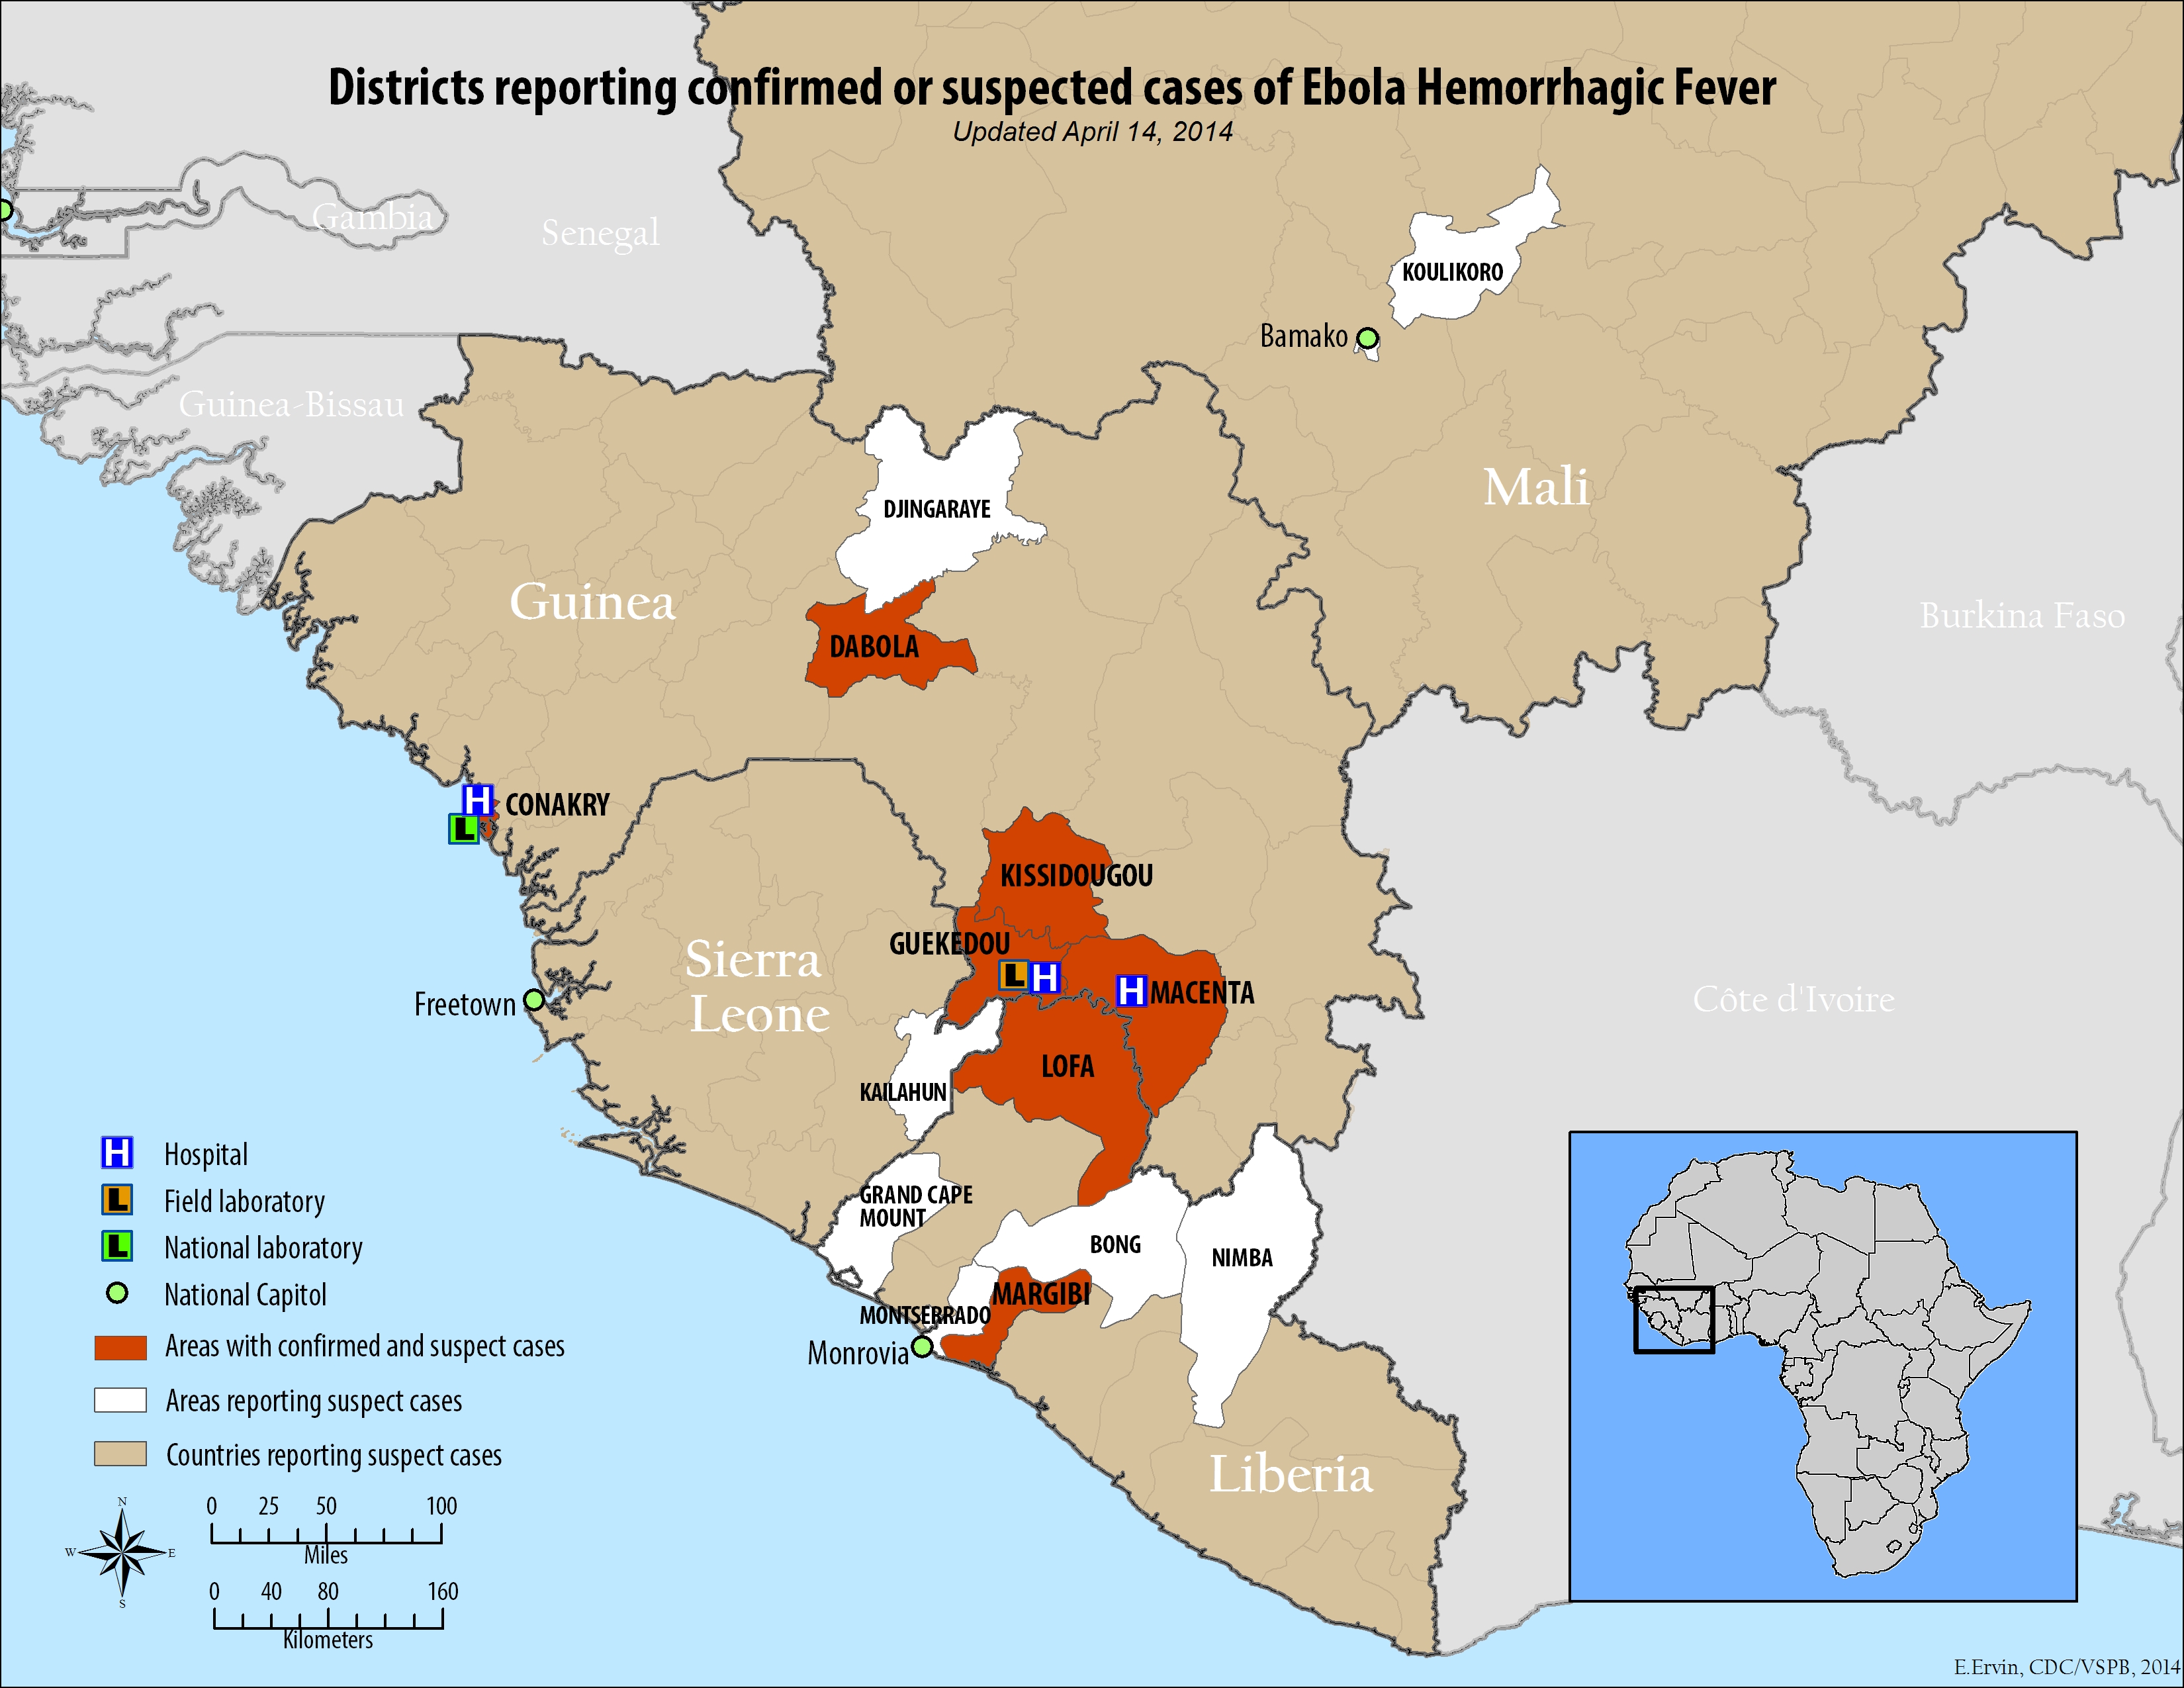 Districts and cities reporting suspect cases of Ebola hemorrhagic fever (updated April 14, 2014)